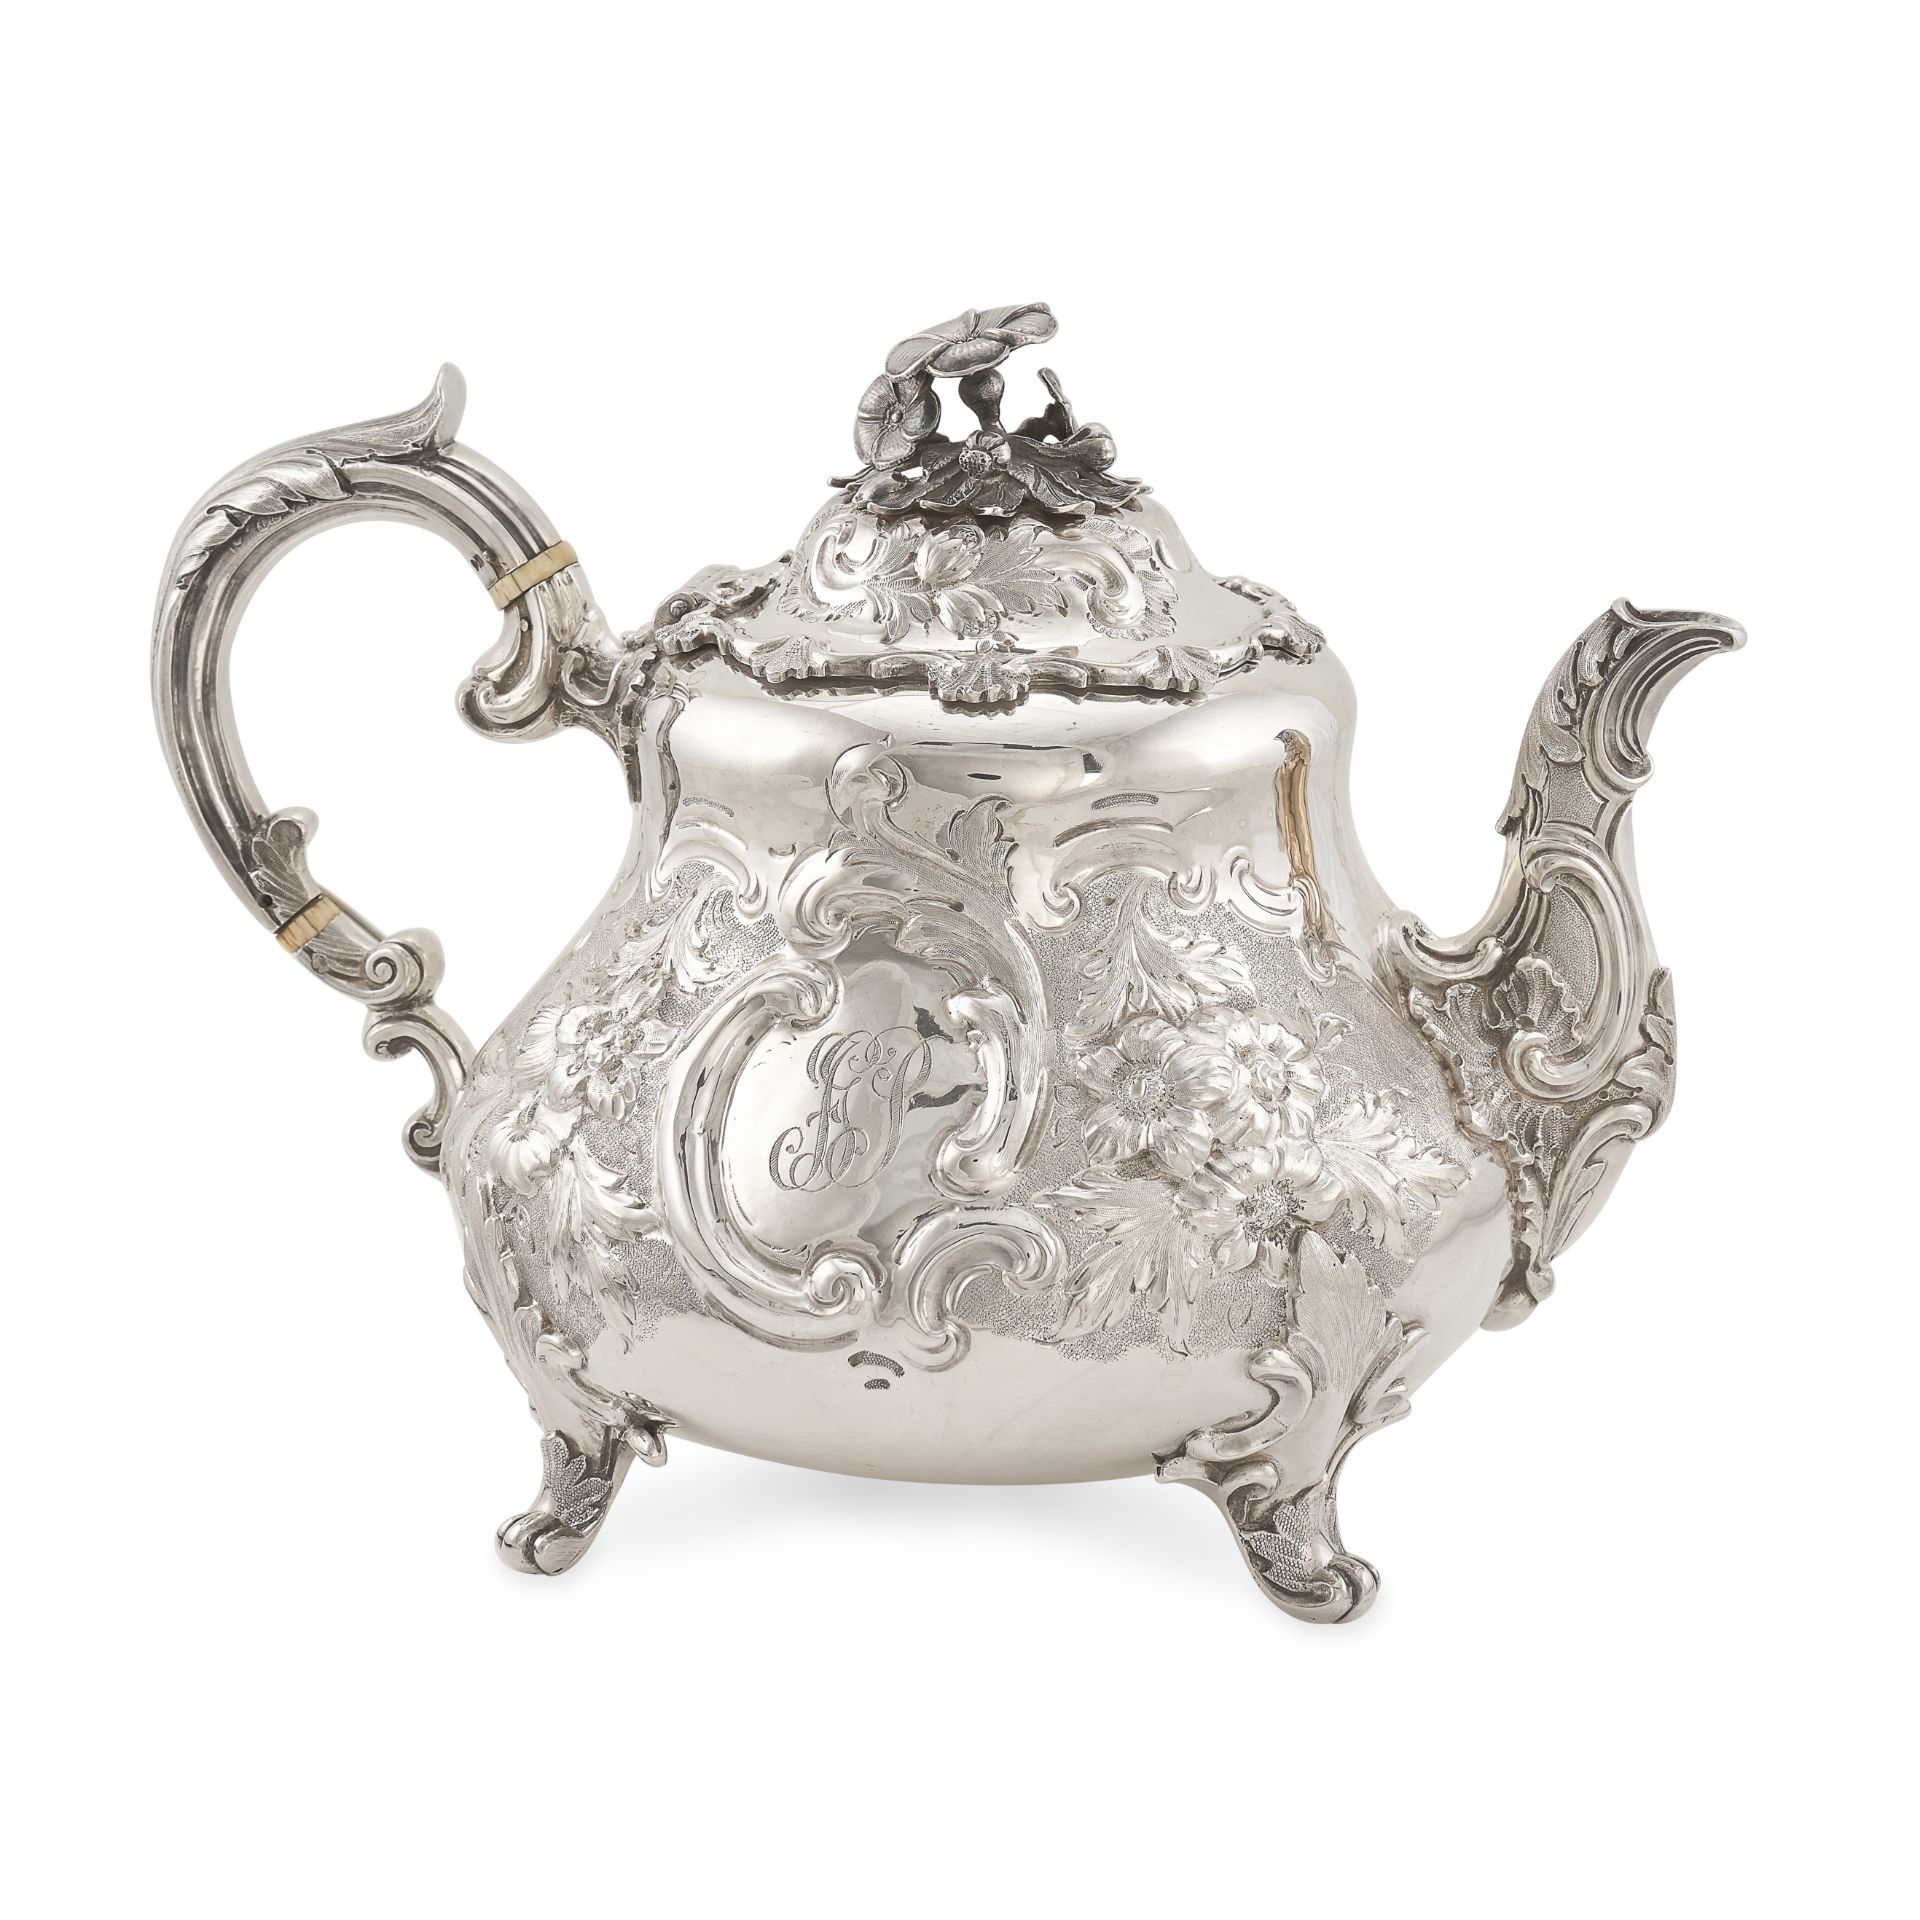 NO RESERVE - AN ANTIQUE VICTORIAN STERLING SILVER TEAPOT, DANIEL & CHARLES HOULE, LONDON 1858 the